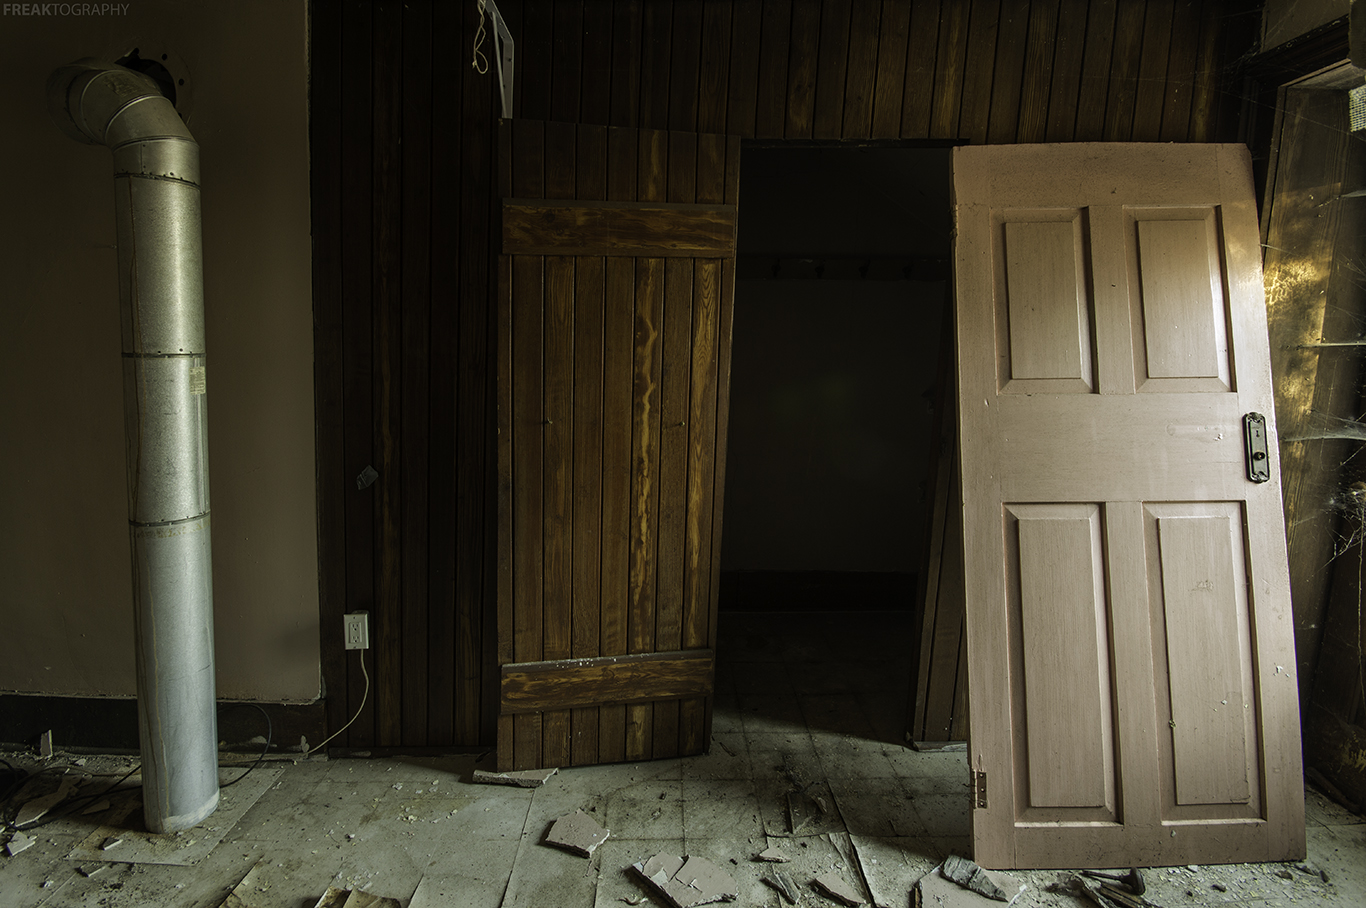 A simple scene found in an abandoned house.